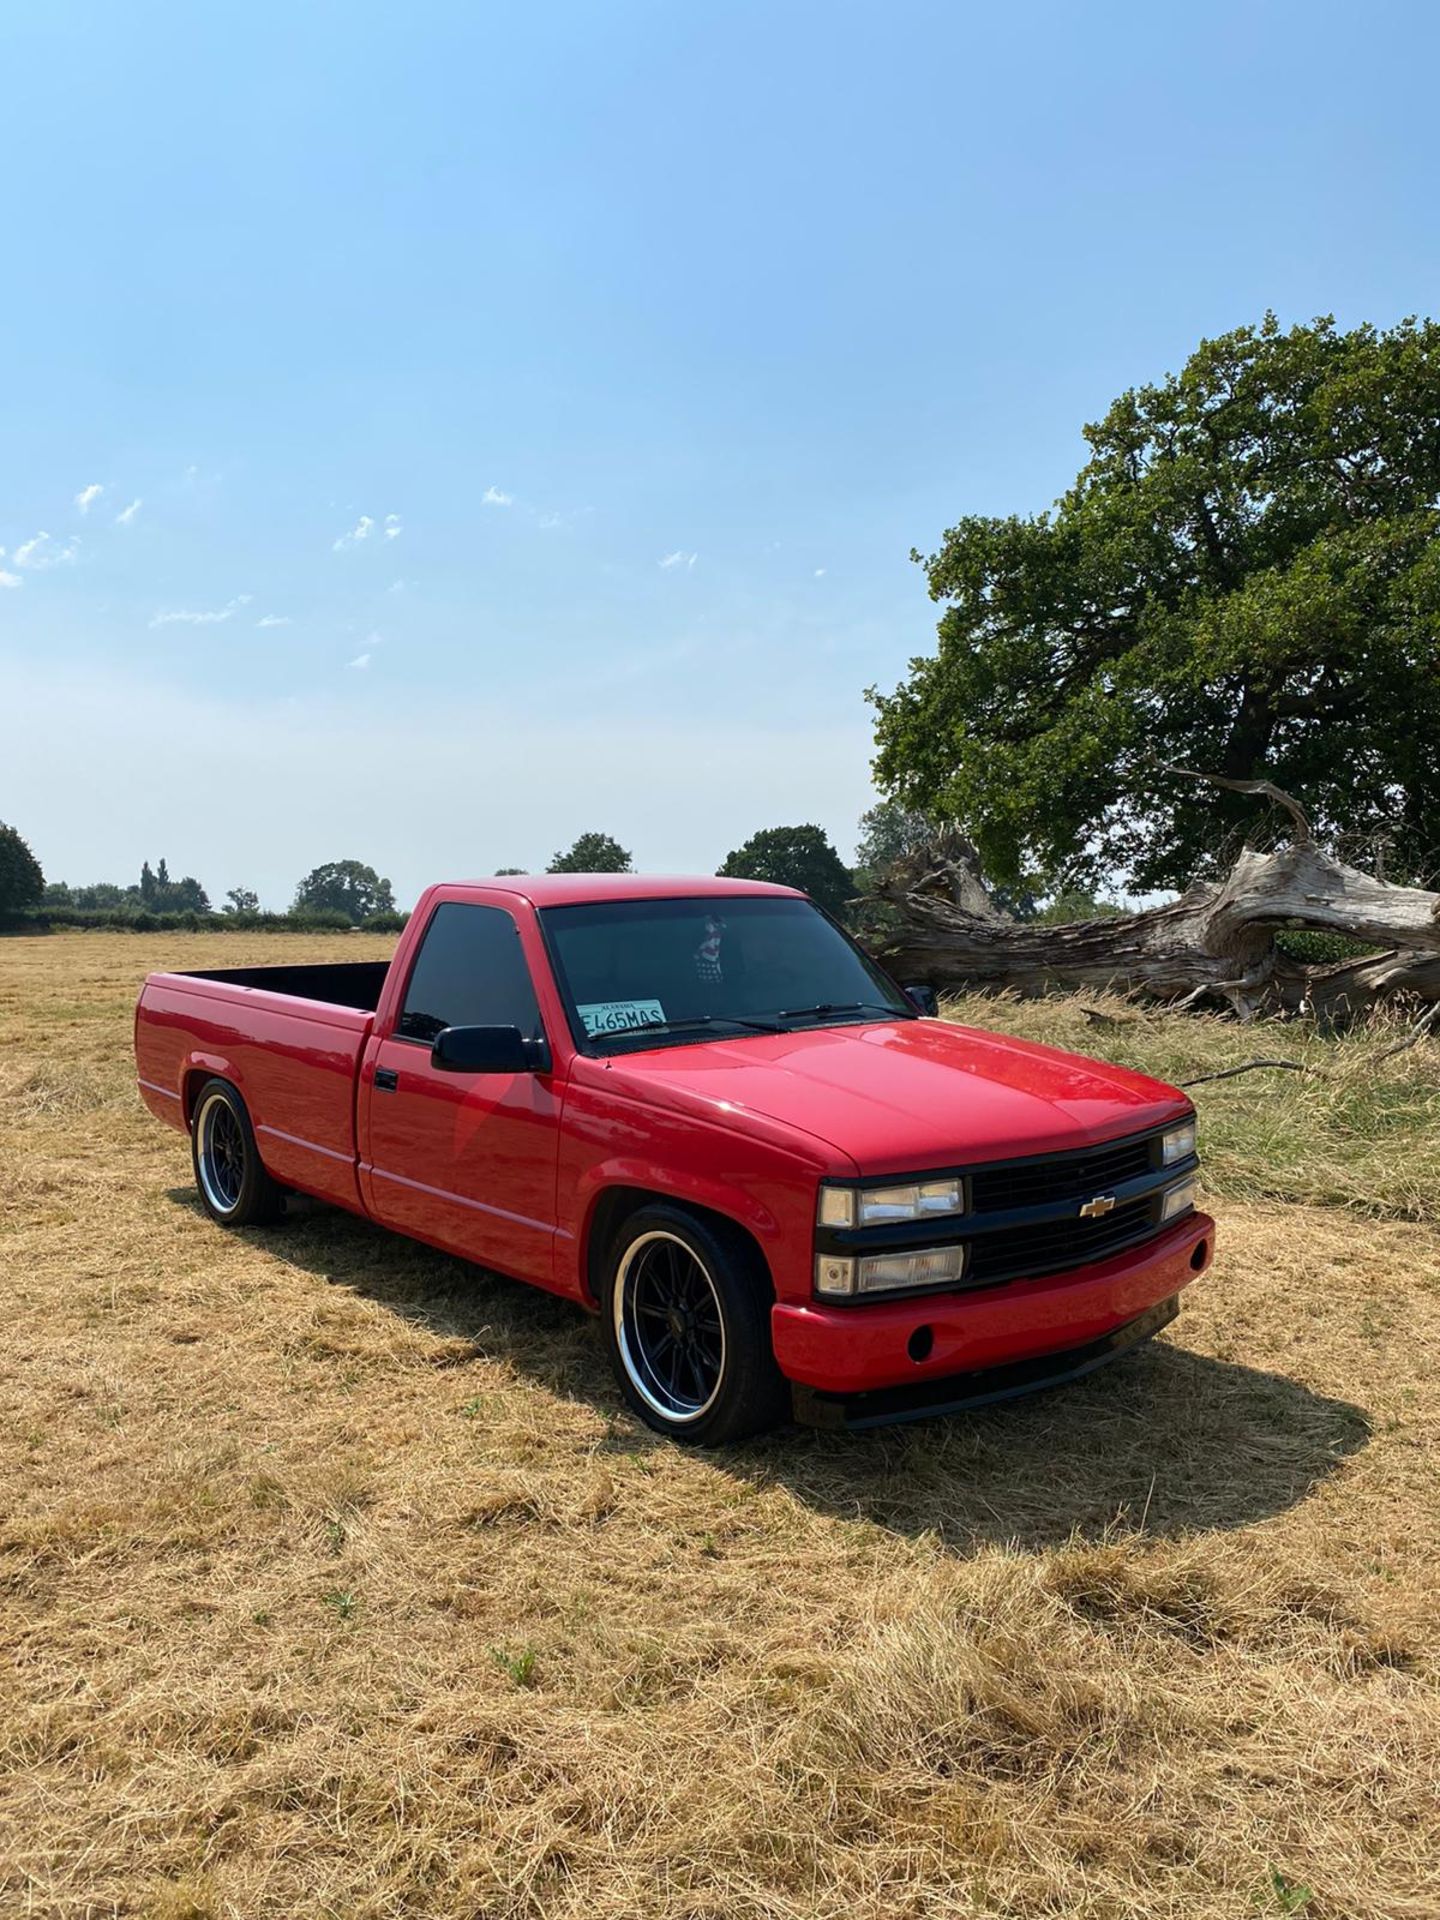 Super Red 1988 Chevrolet C1500 / OBS / GMT-400 - Single cab long bed (8ft) - Image 9 of 15